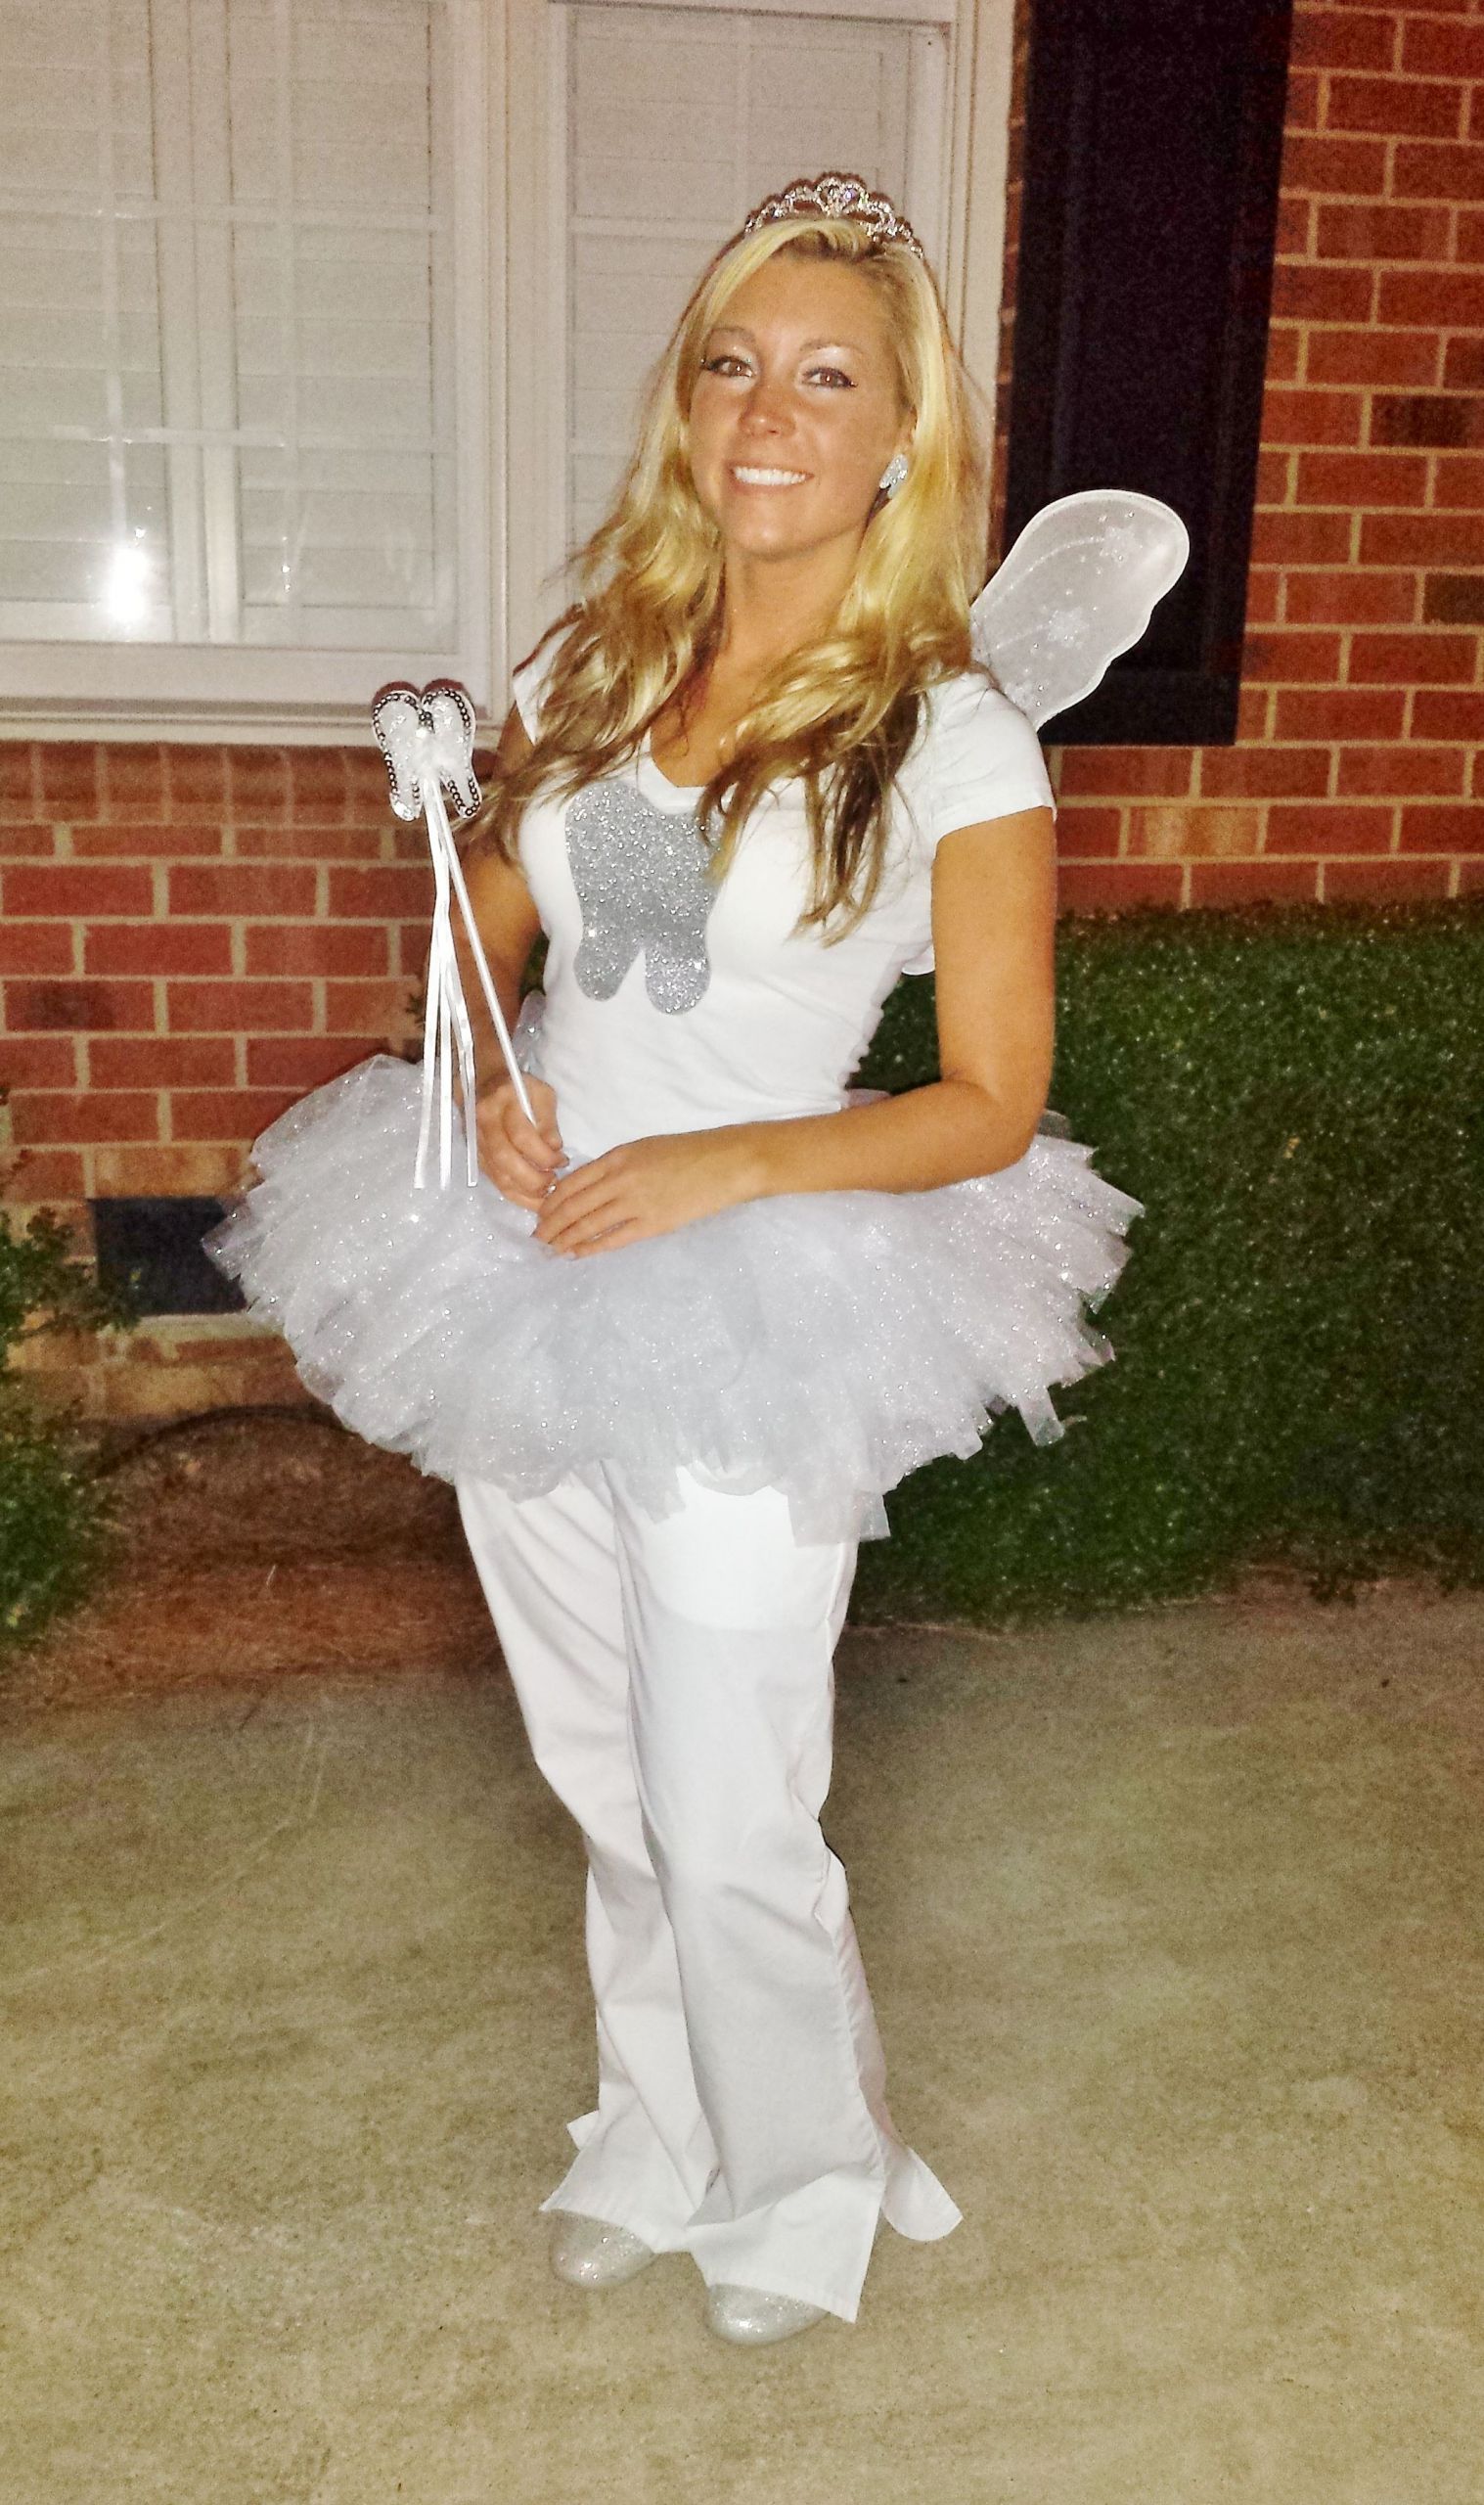 Tooth Fairy Costume DIY
 DIY Tooth Fairy Costume =D With images